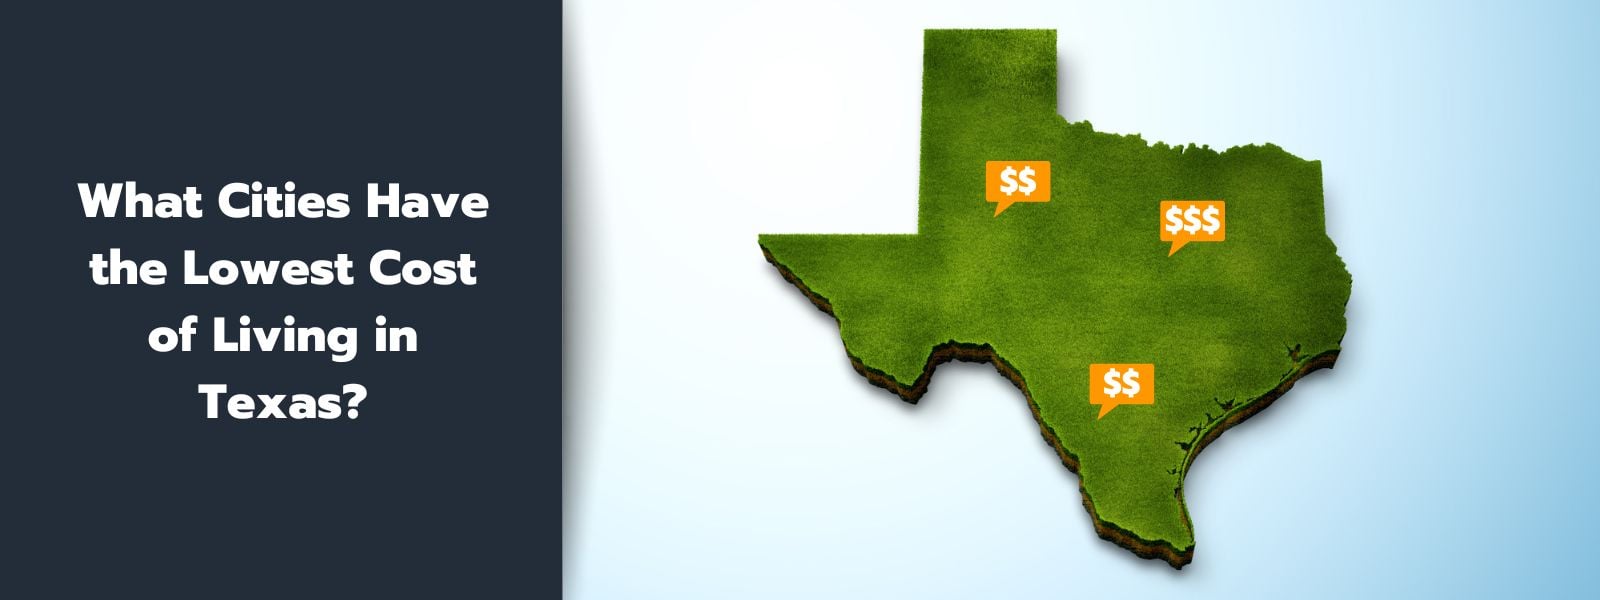 What Cities Have the Lowest Cost of Living in Texas